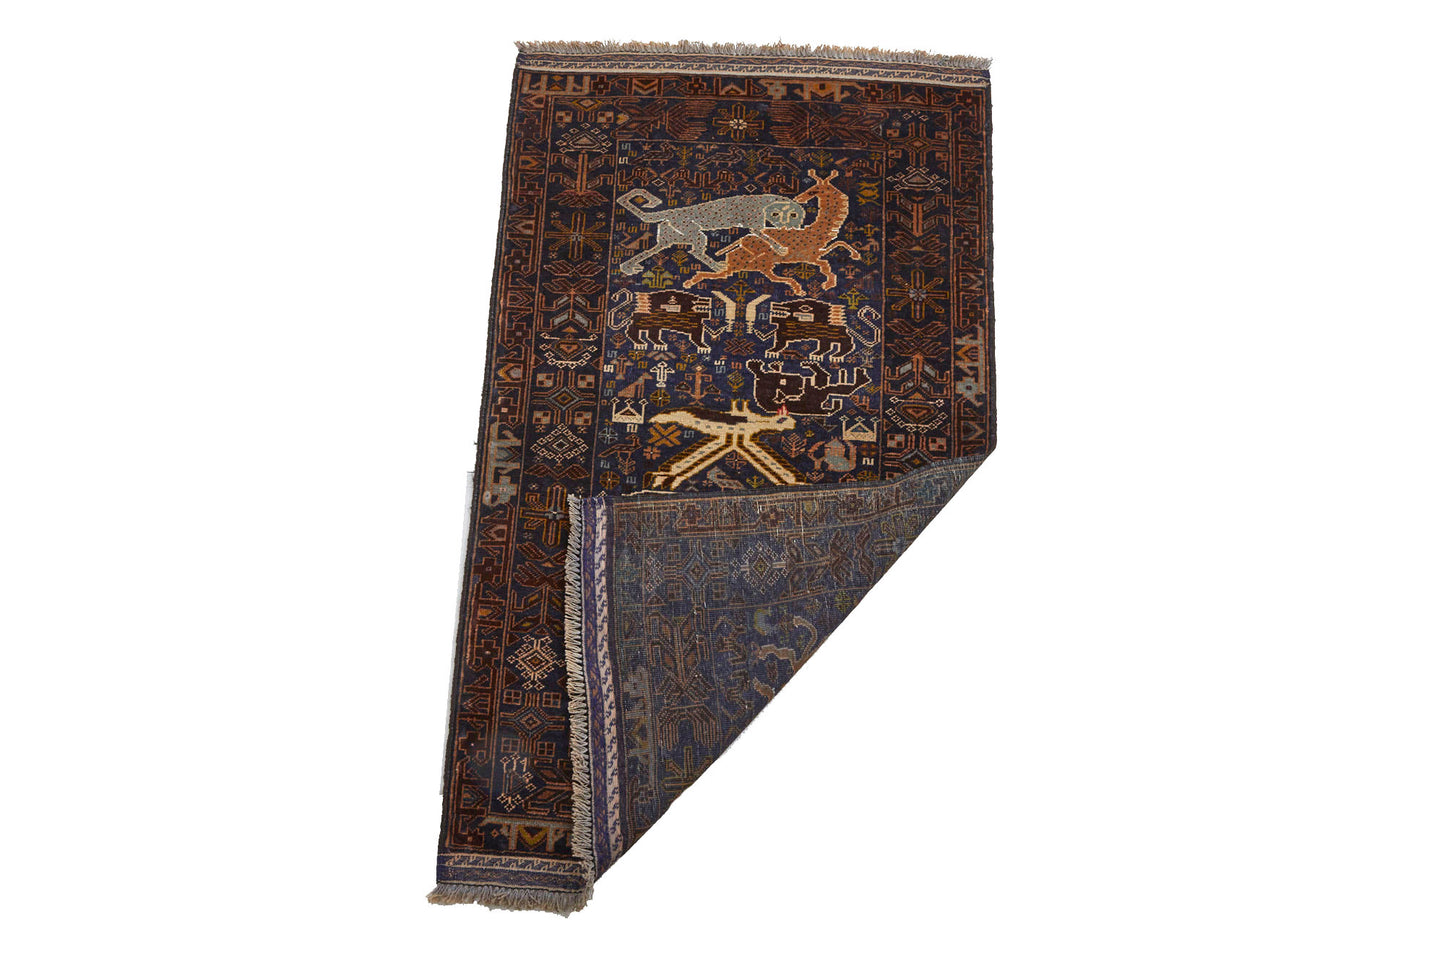 Handwoven Afghan Shikargah pictorial rug depicting leopard or tiger attacking a deer on dark blue background, surrounded by symbols -  Available from King Kennedy Rugs Los Angeles